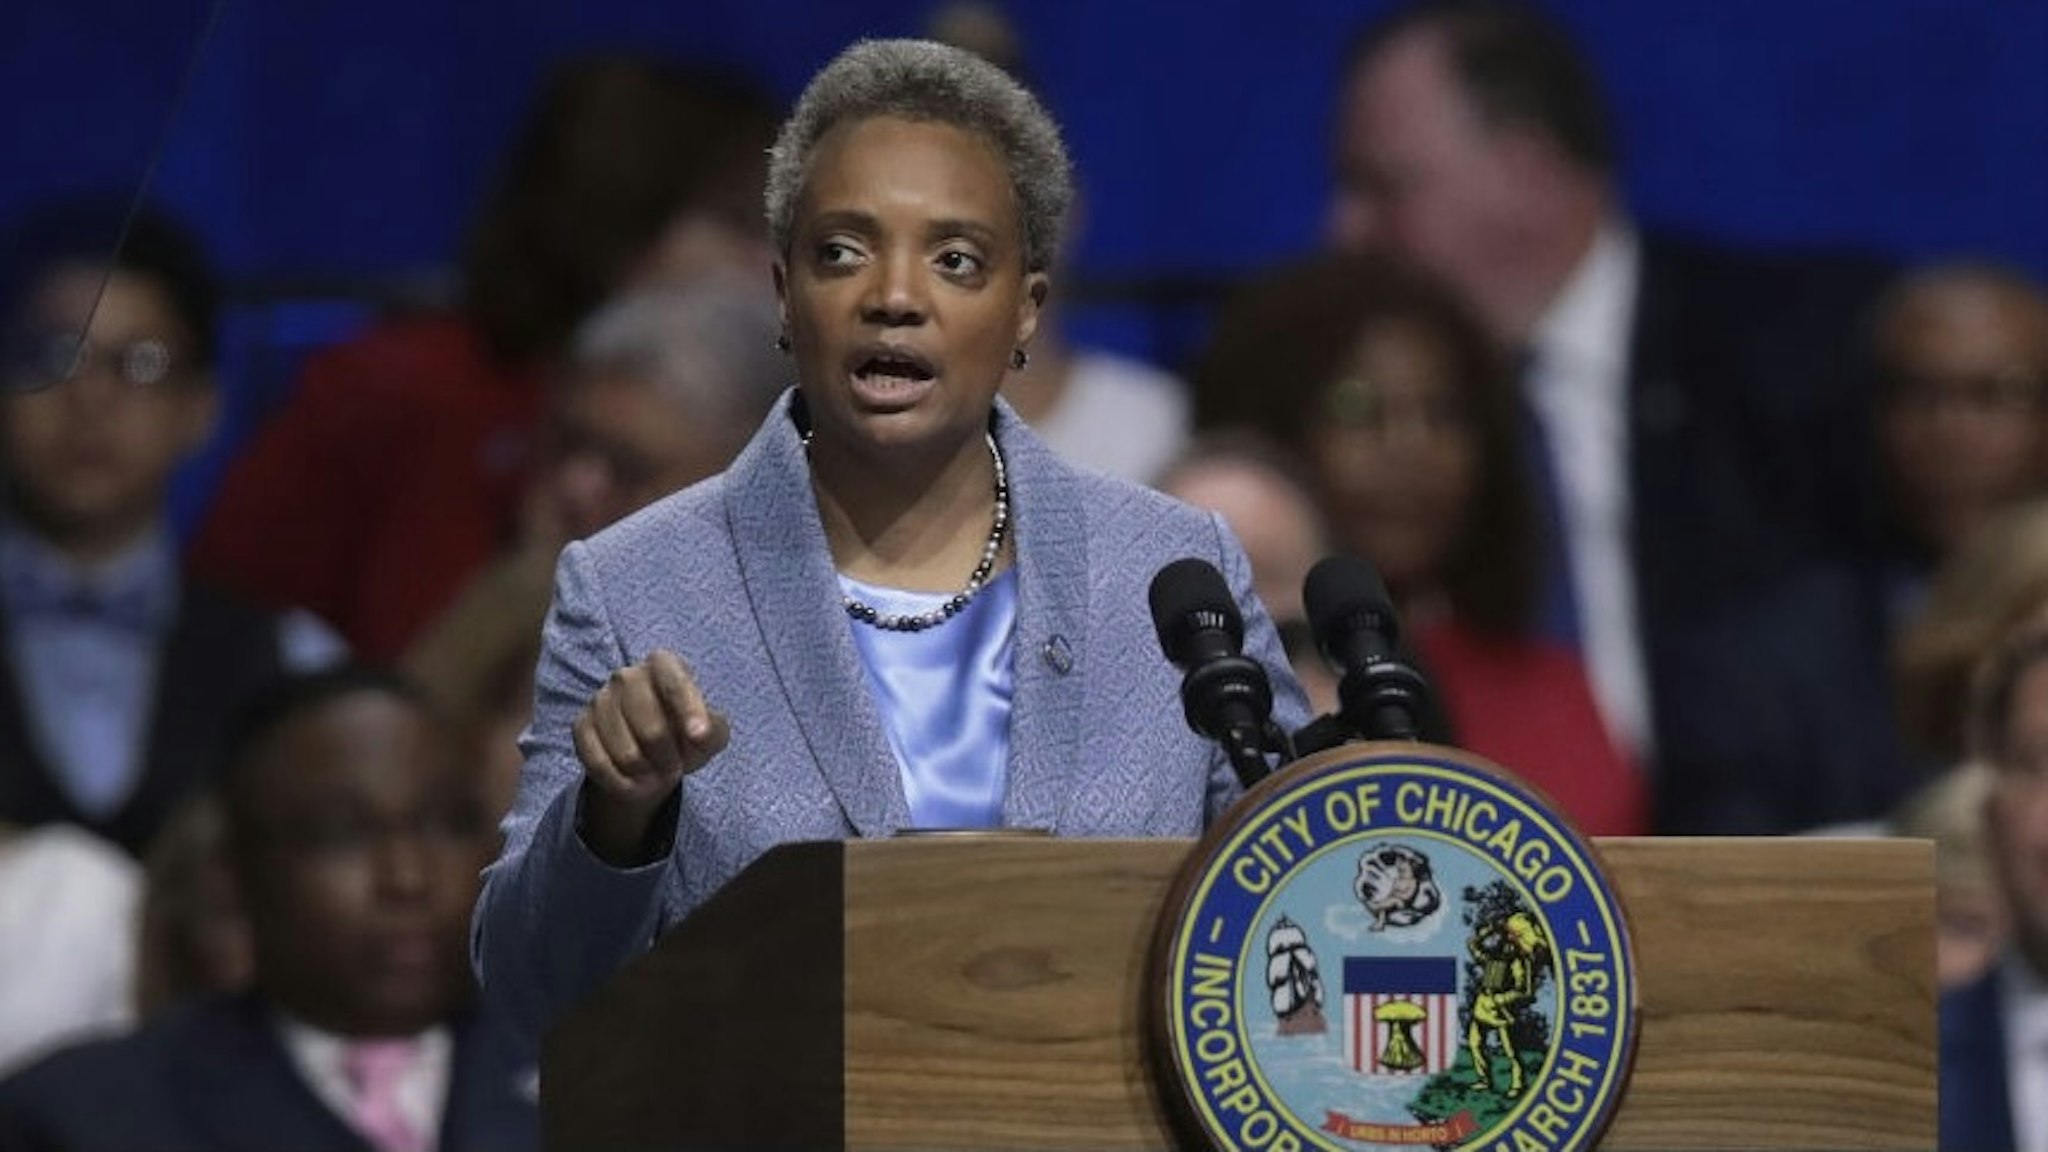 Lori Lightfoot Is Sworn In As Chicago's First Female African American Mayor CHICAGO, ILLINOIS - MAY 20: Lori Lightfoot addresses guests after being sworn in as Mayor of Chicago during a ceremony at the Wintrust Arena on May 20, 2019 in Chicago, Illinois. Lightfoot become the first black female and openly gay Mayor in the city’s history. (Photo by Scott Olson/Getty Images)